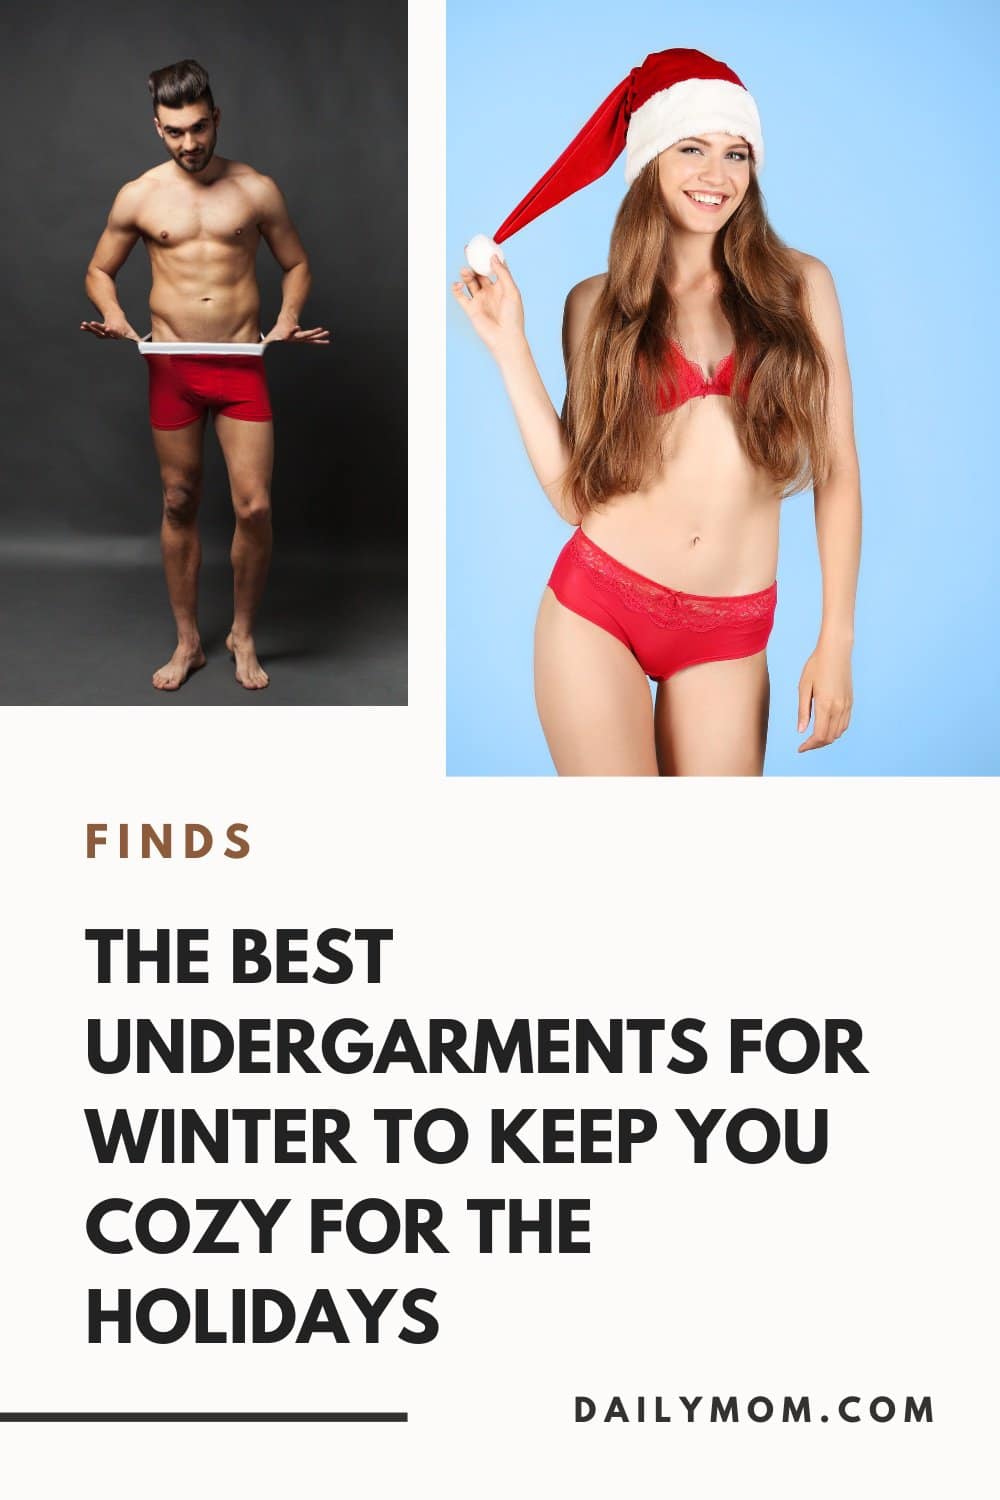 12 Of The Best Undergarments For Winter To You Keep Cozy 52 Daily Mom, Magazine For Families